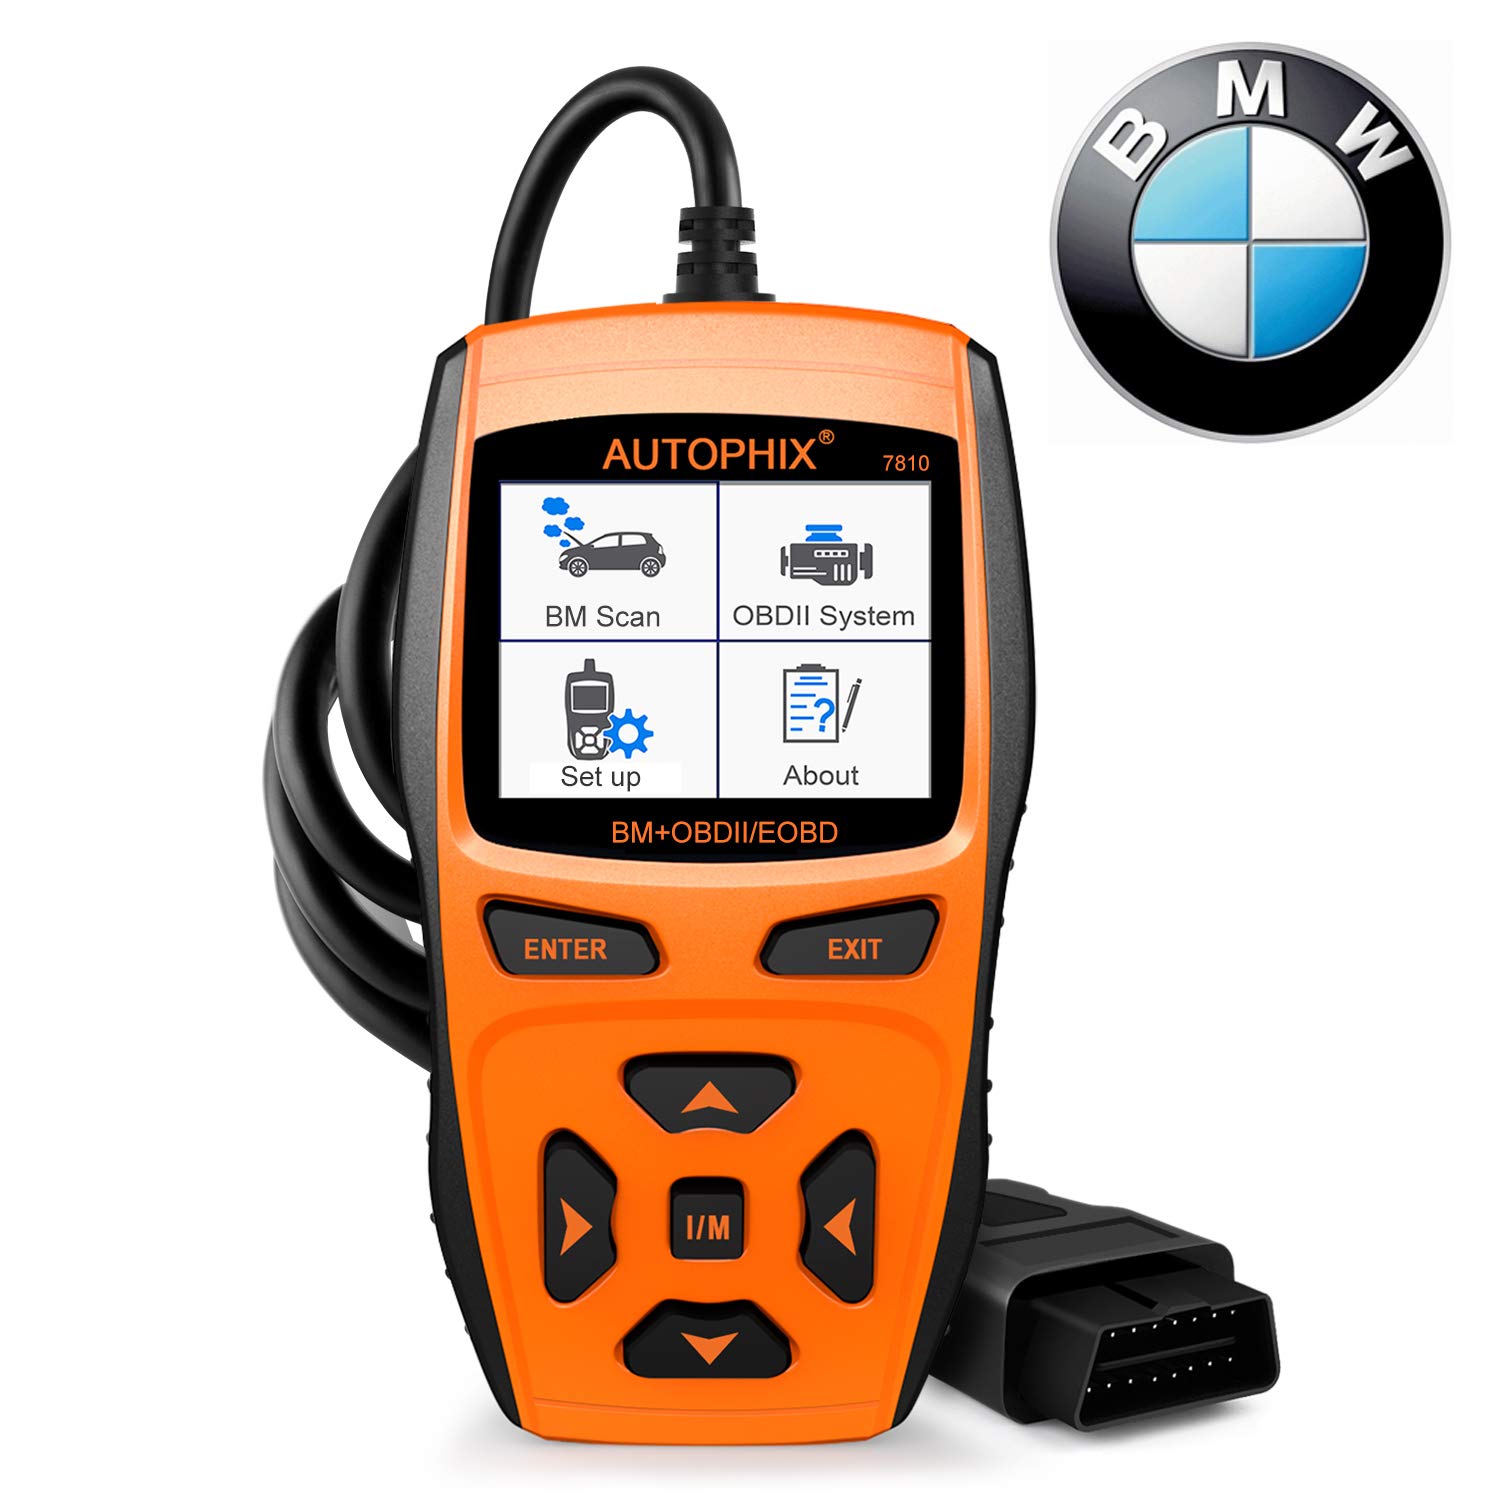 Read/SCAN/Clear/Erase APSG Engine Light OBD 11 Scanner Fault Code Reader 2/11 Includes Direction Booklet with Code Chart. 